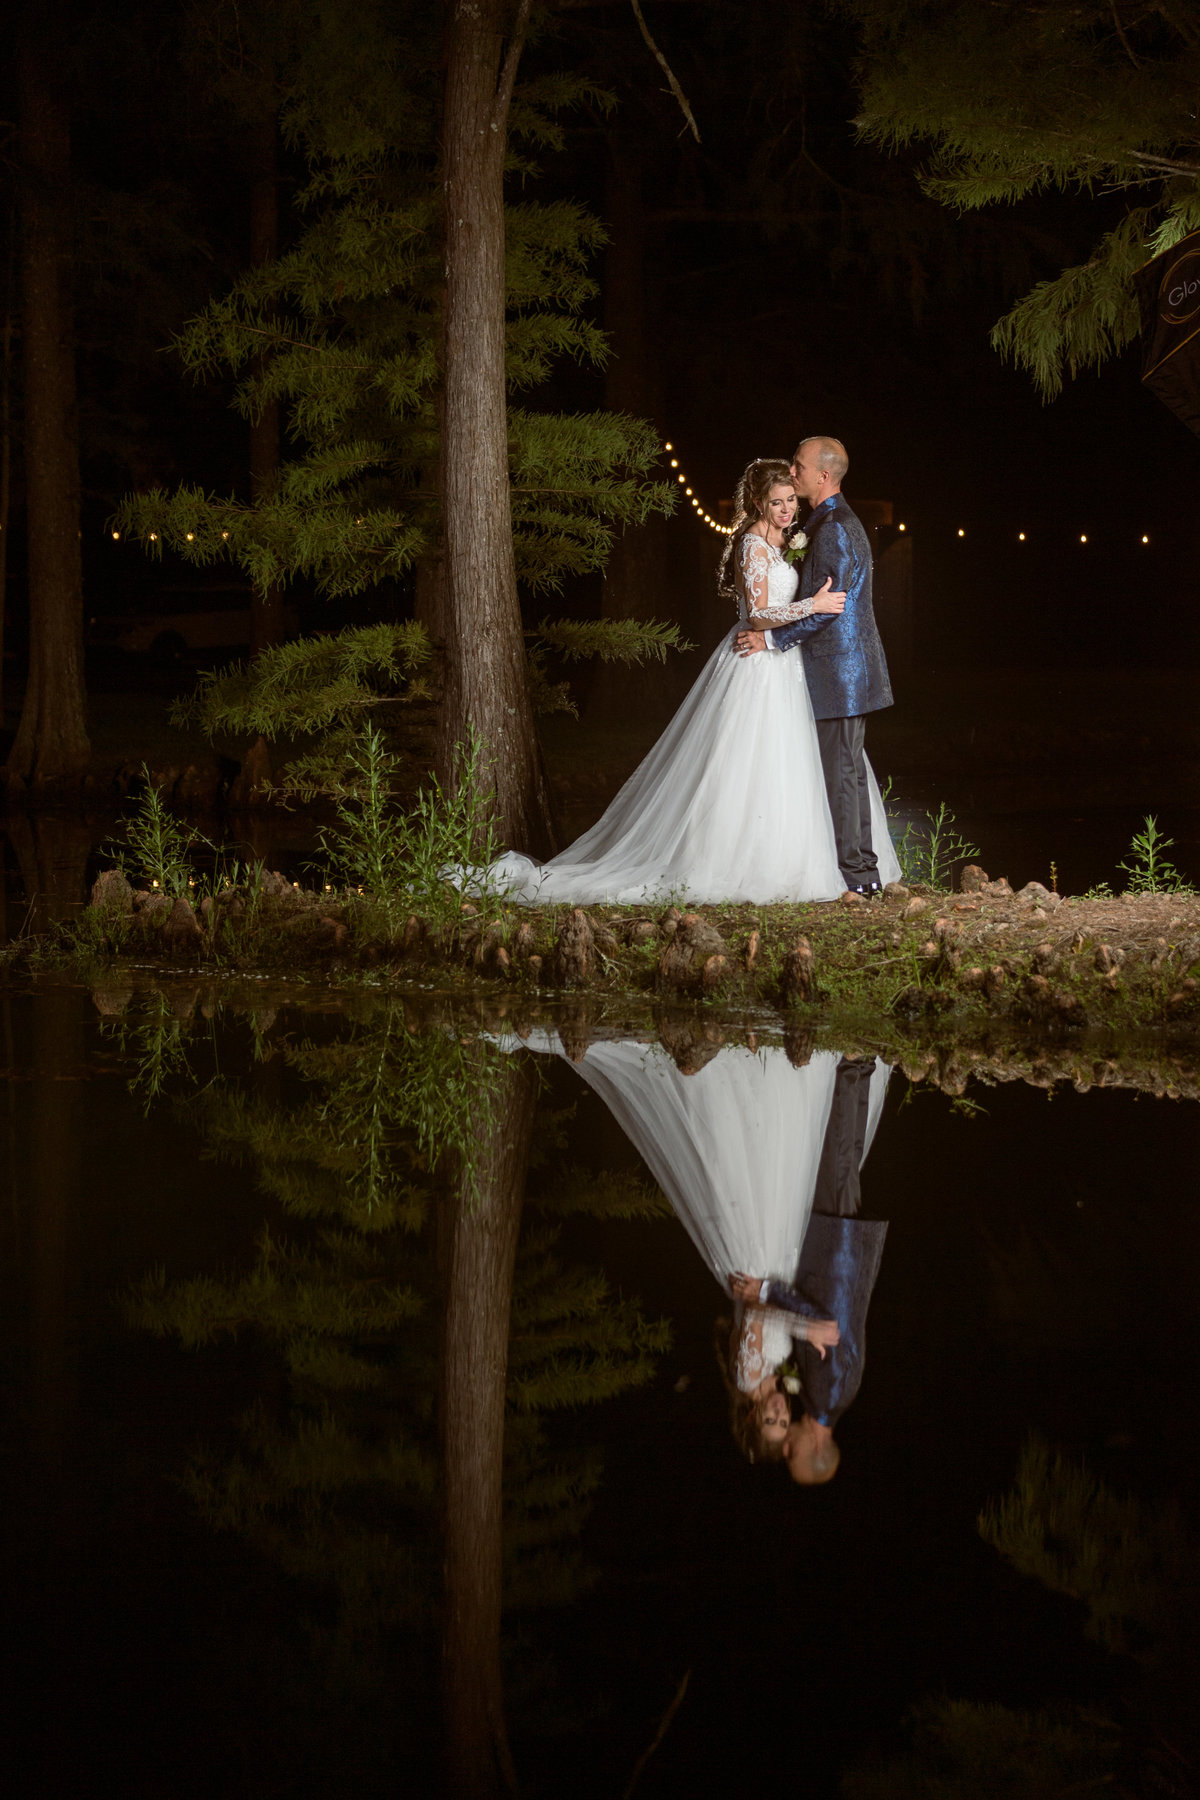 Bride & Groom in embrace by a pond.